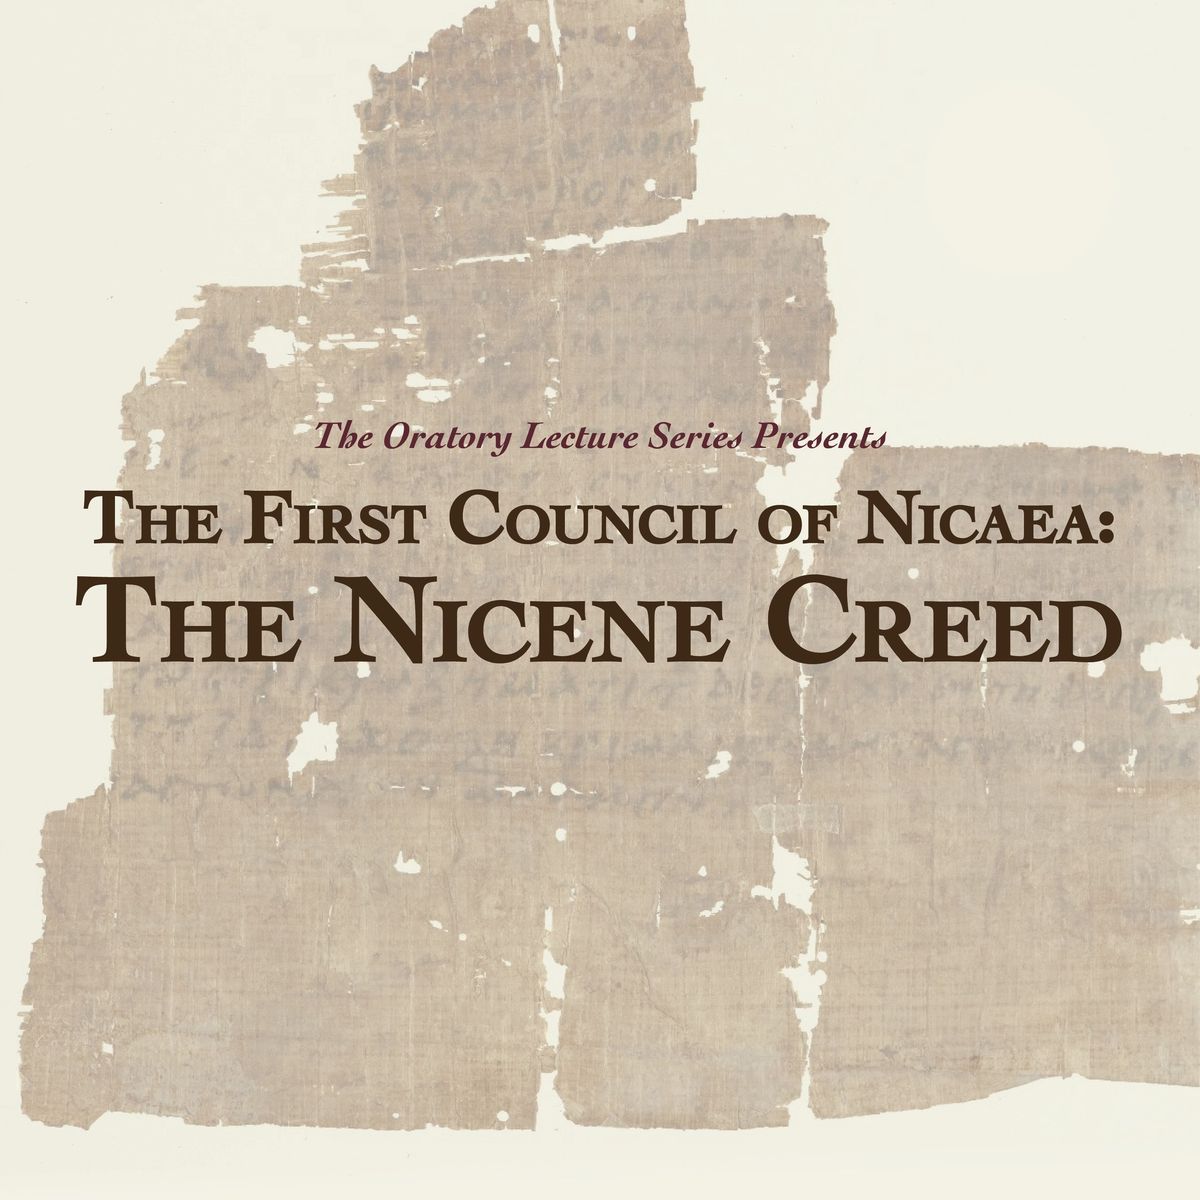 Oratory Lecture Series: The First Council of Nicaea - The Nicene Creed